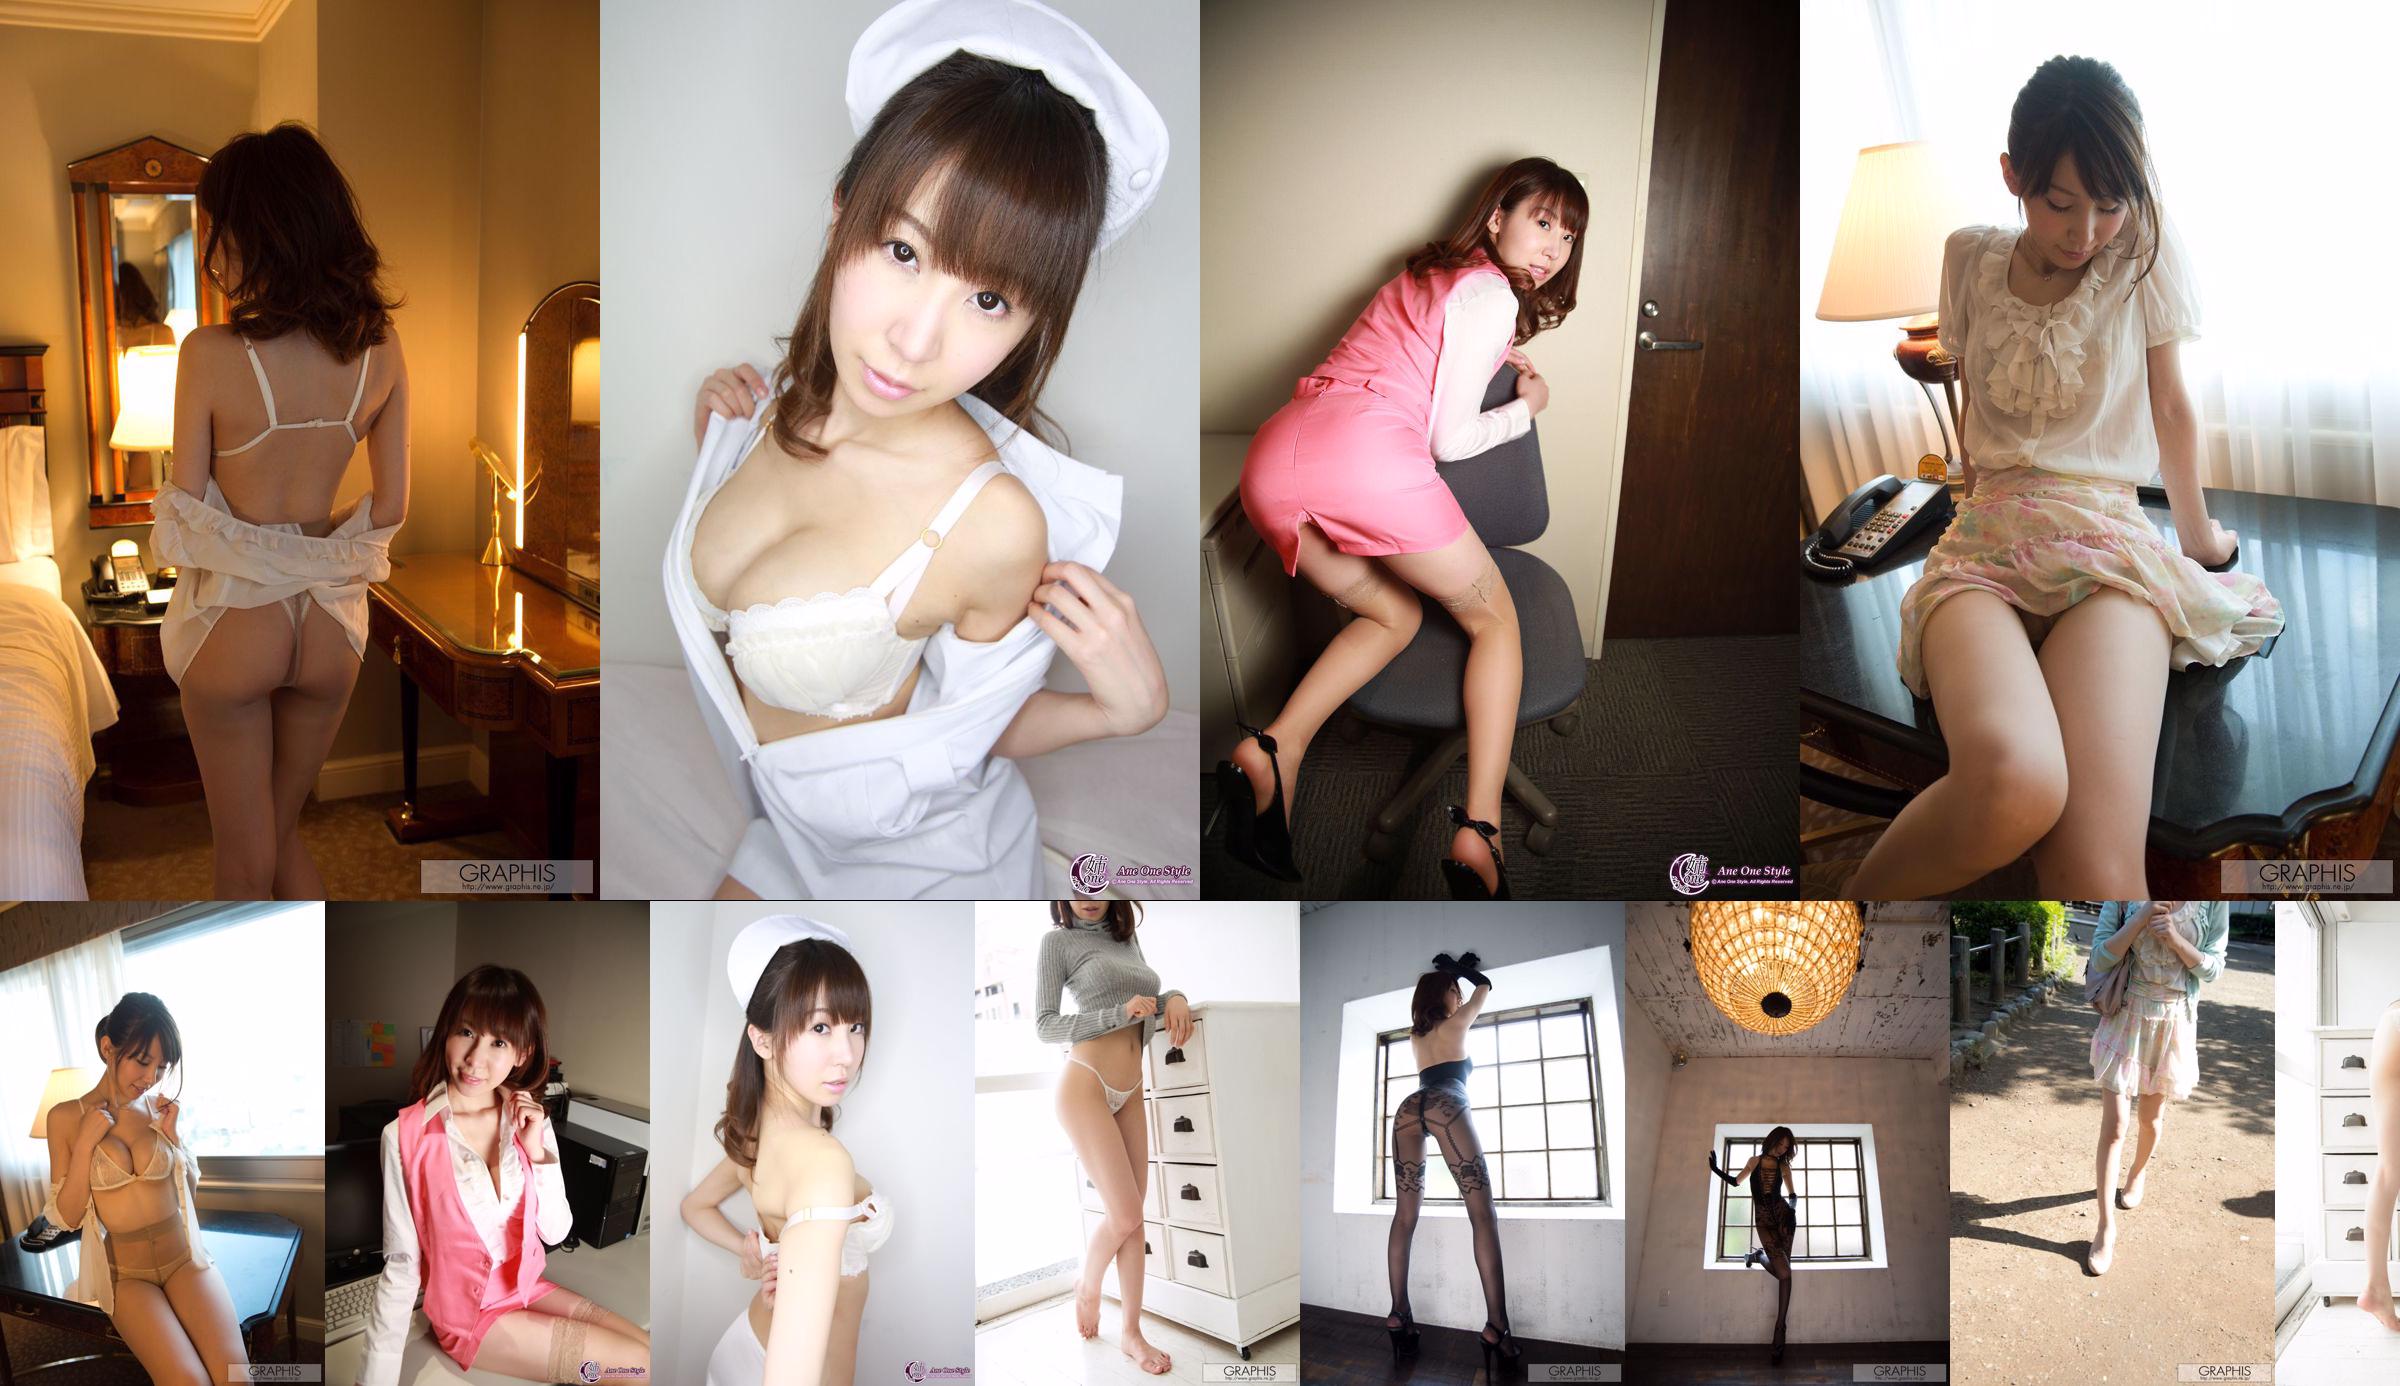 Chibana Meisa / Chibana Meisa [Graphis] First Gravure First take off daughter No.16b779 Page 1